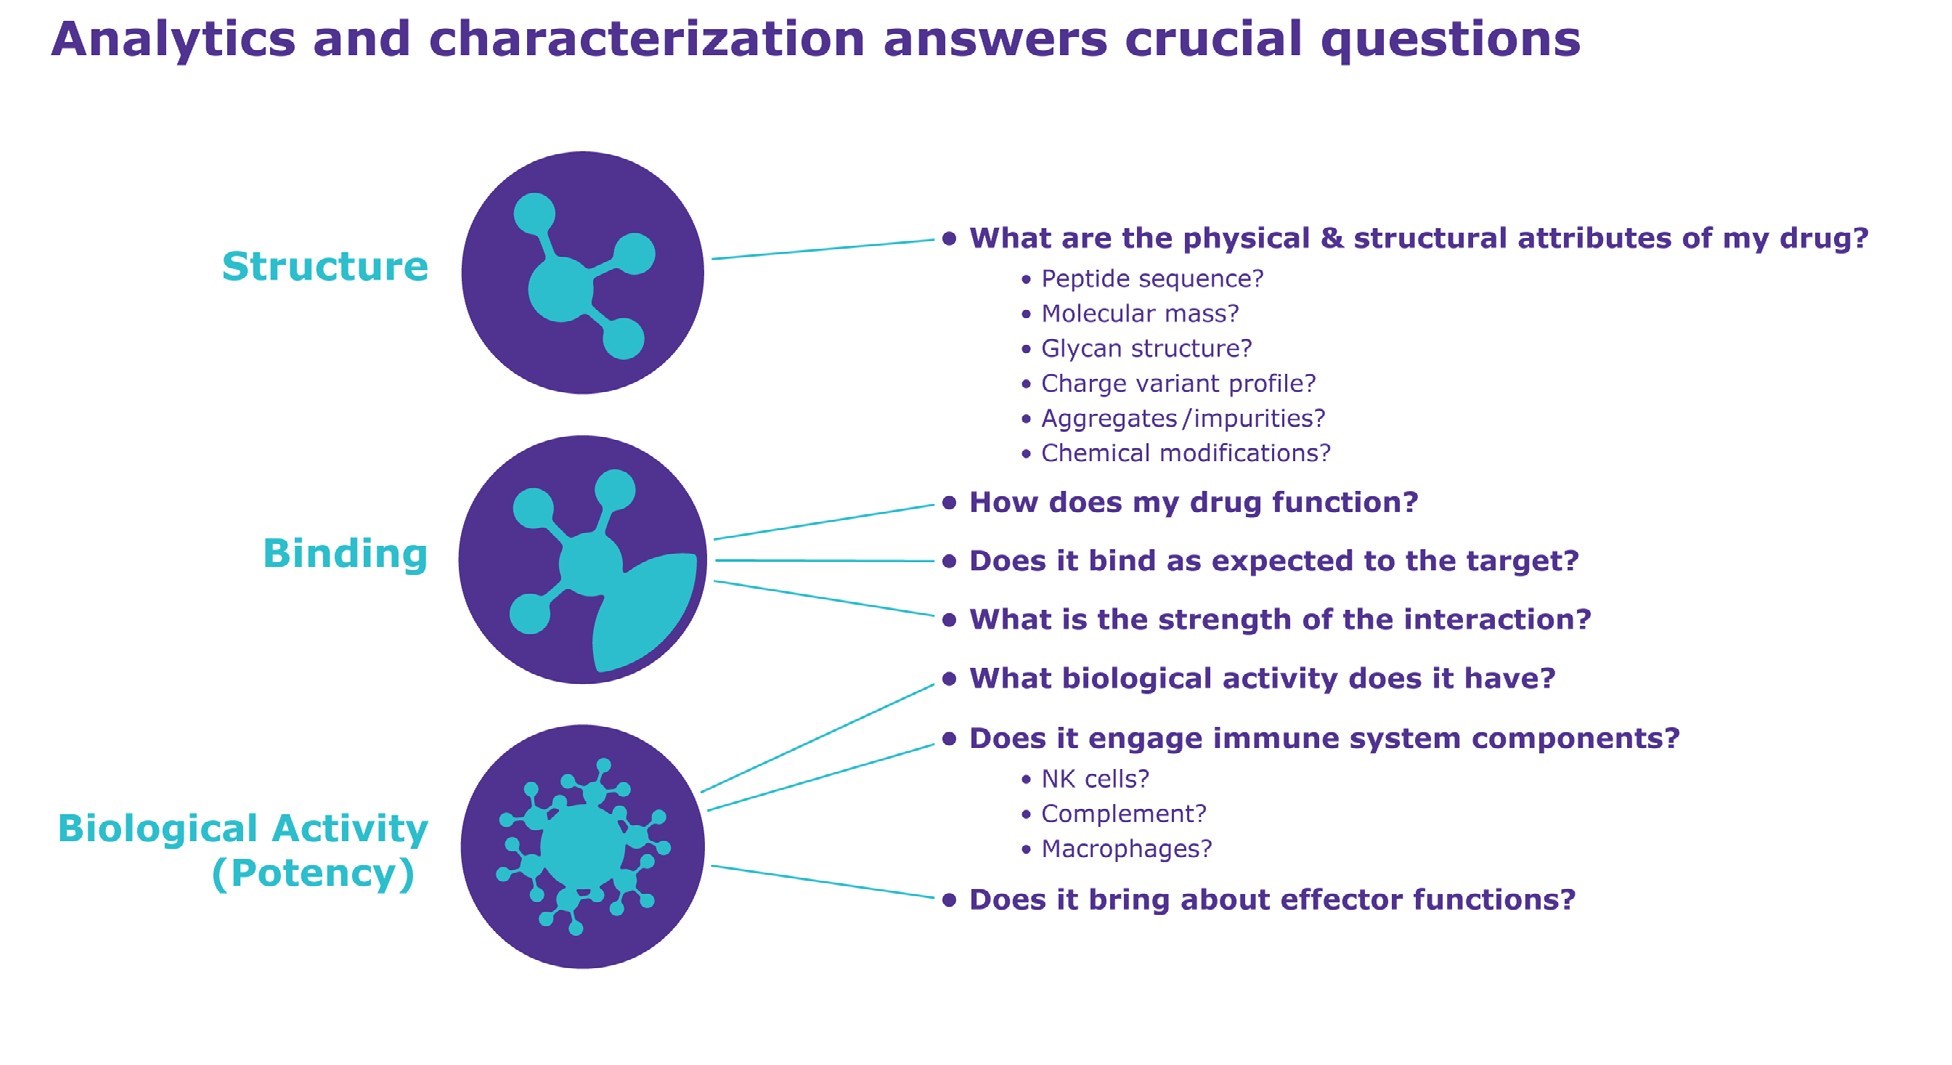 Analytics and characterization answers crucial questions